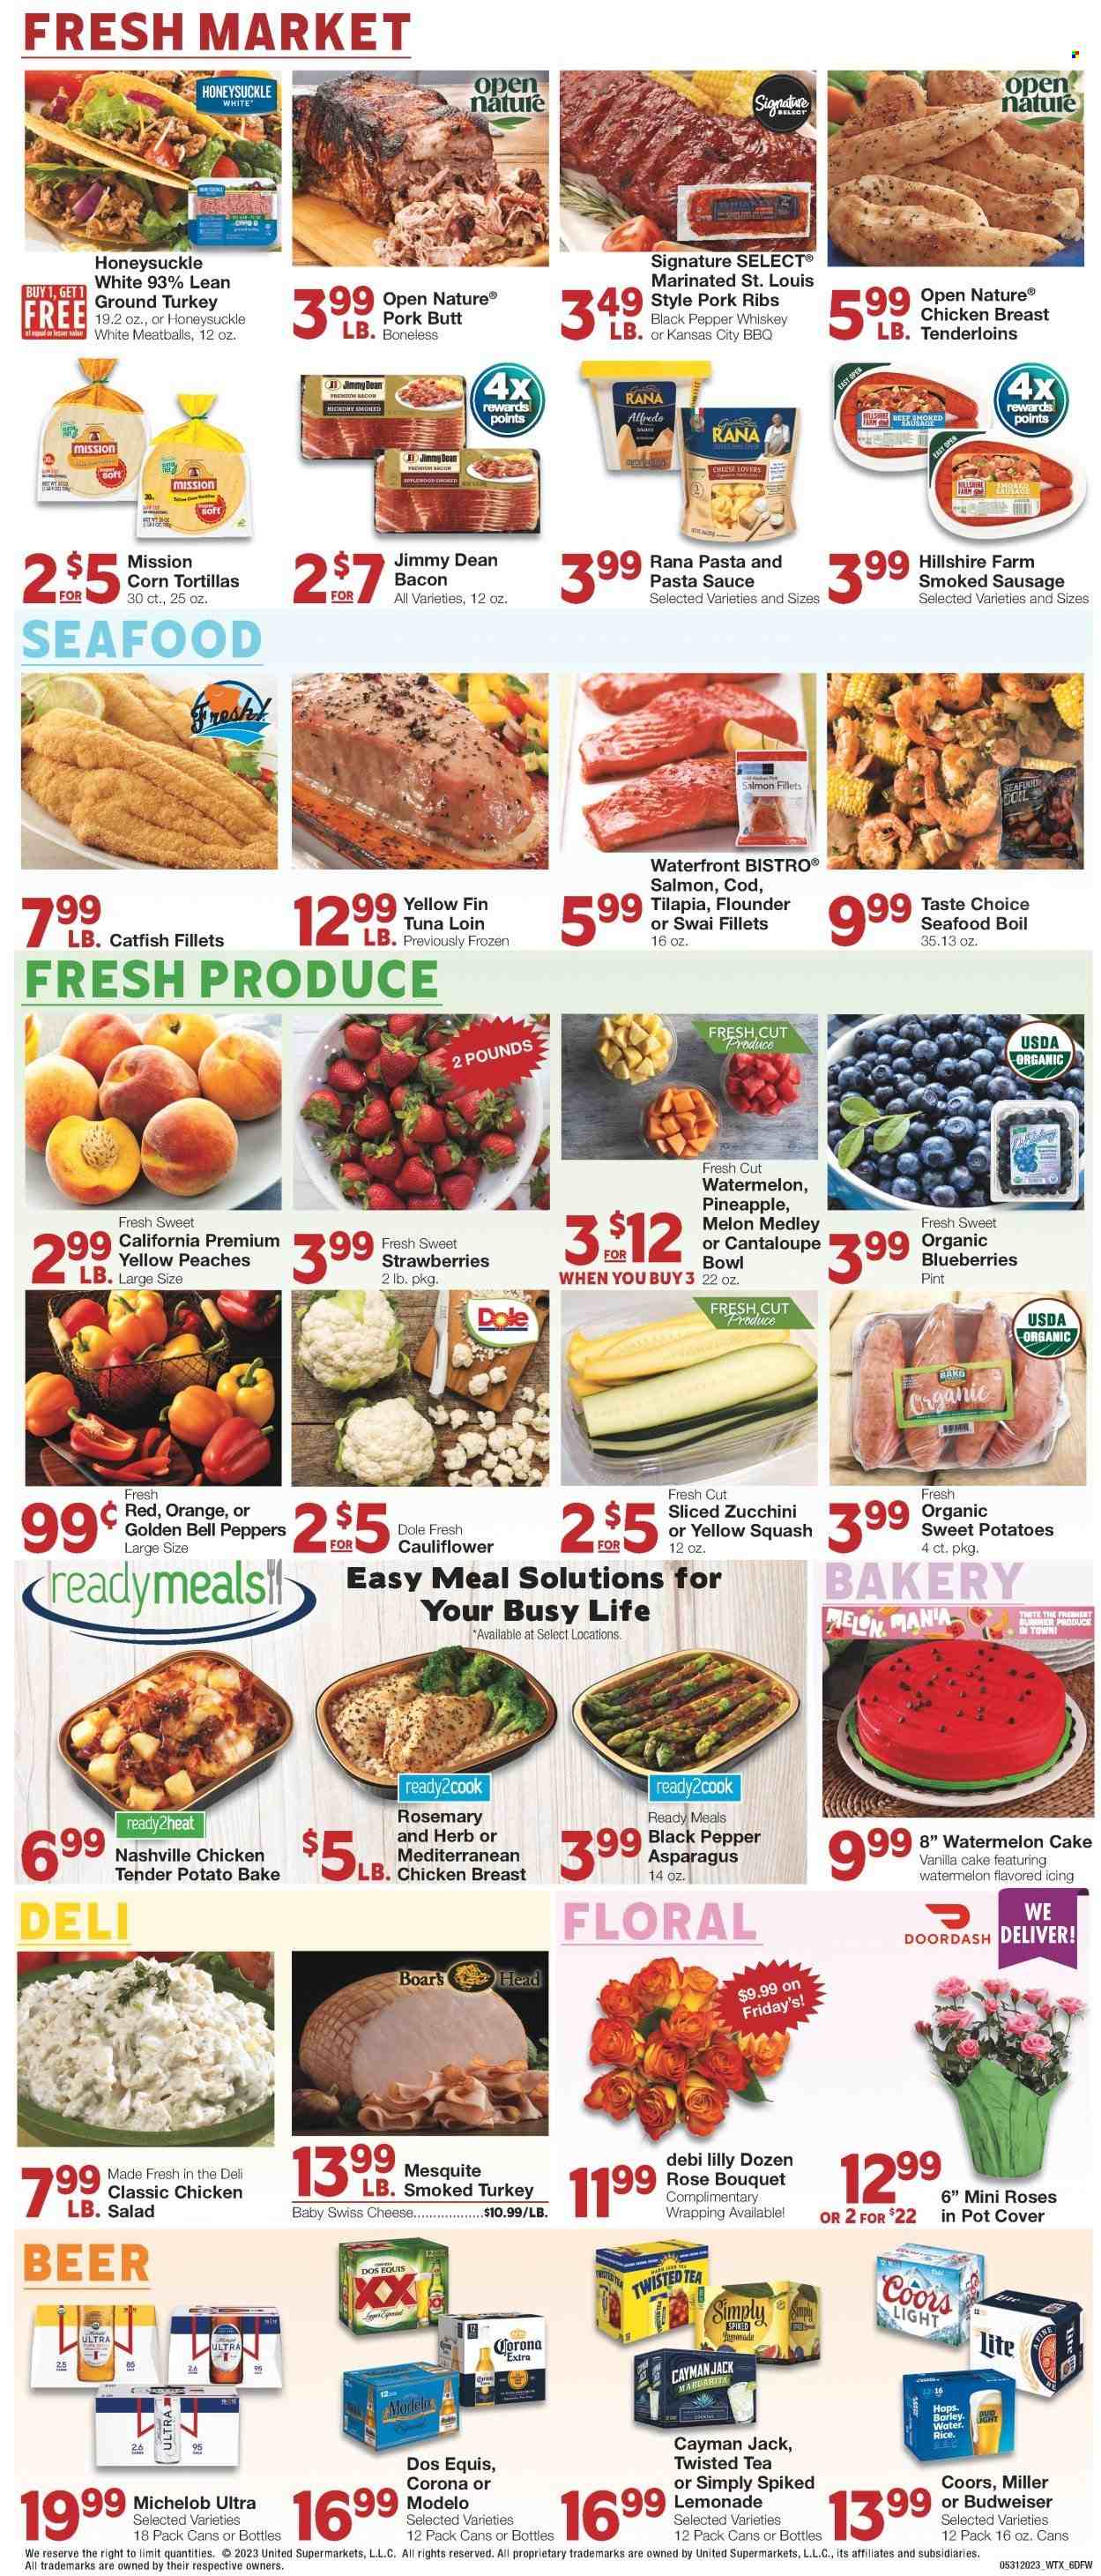 thumbnail - Market Street Flyer - 05/31/2023 - 06/06/2023 - Sales products - corn tortillas, tortillas, cake, asparagus, bell peppers, cauliflower, sweet potato, zucchini, salad, Dole, peppers, yellow squash, blueberries, strawberries, peaches, catfish, cod, flounder, salmon, salmon fillet, tilapia, tuna, seafood, seafood boil, swai fillet, pasta sauce, meatballs, sauce, Rana, Jimmy Dean, bacon, Hillshire Farm, smoked sausage, swiss cheese, cheese, rosemary, black pepper, herbs, lemonade, ice tea, water, alcohol, whiskey, whisky, Corona Extra, Lager, Modelo, ground turkey, chicken breasts, chicken, turkey, ribs, pork meat, pork ribs, pork butt, bowl, bouquet, rose, Budweiser, melons, Coors, Dos Equis, Twisted Tea, Michelob. Page 6.